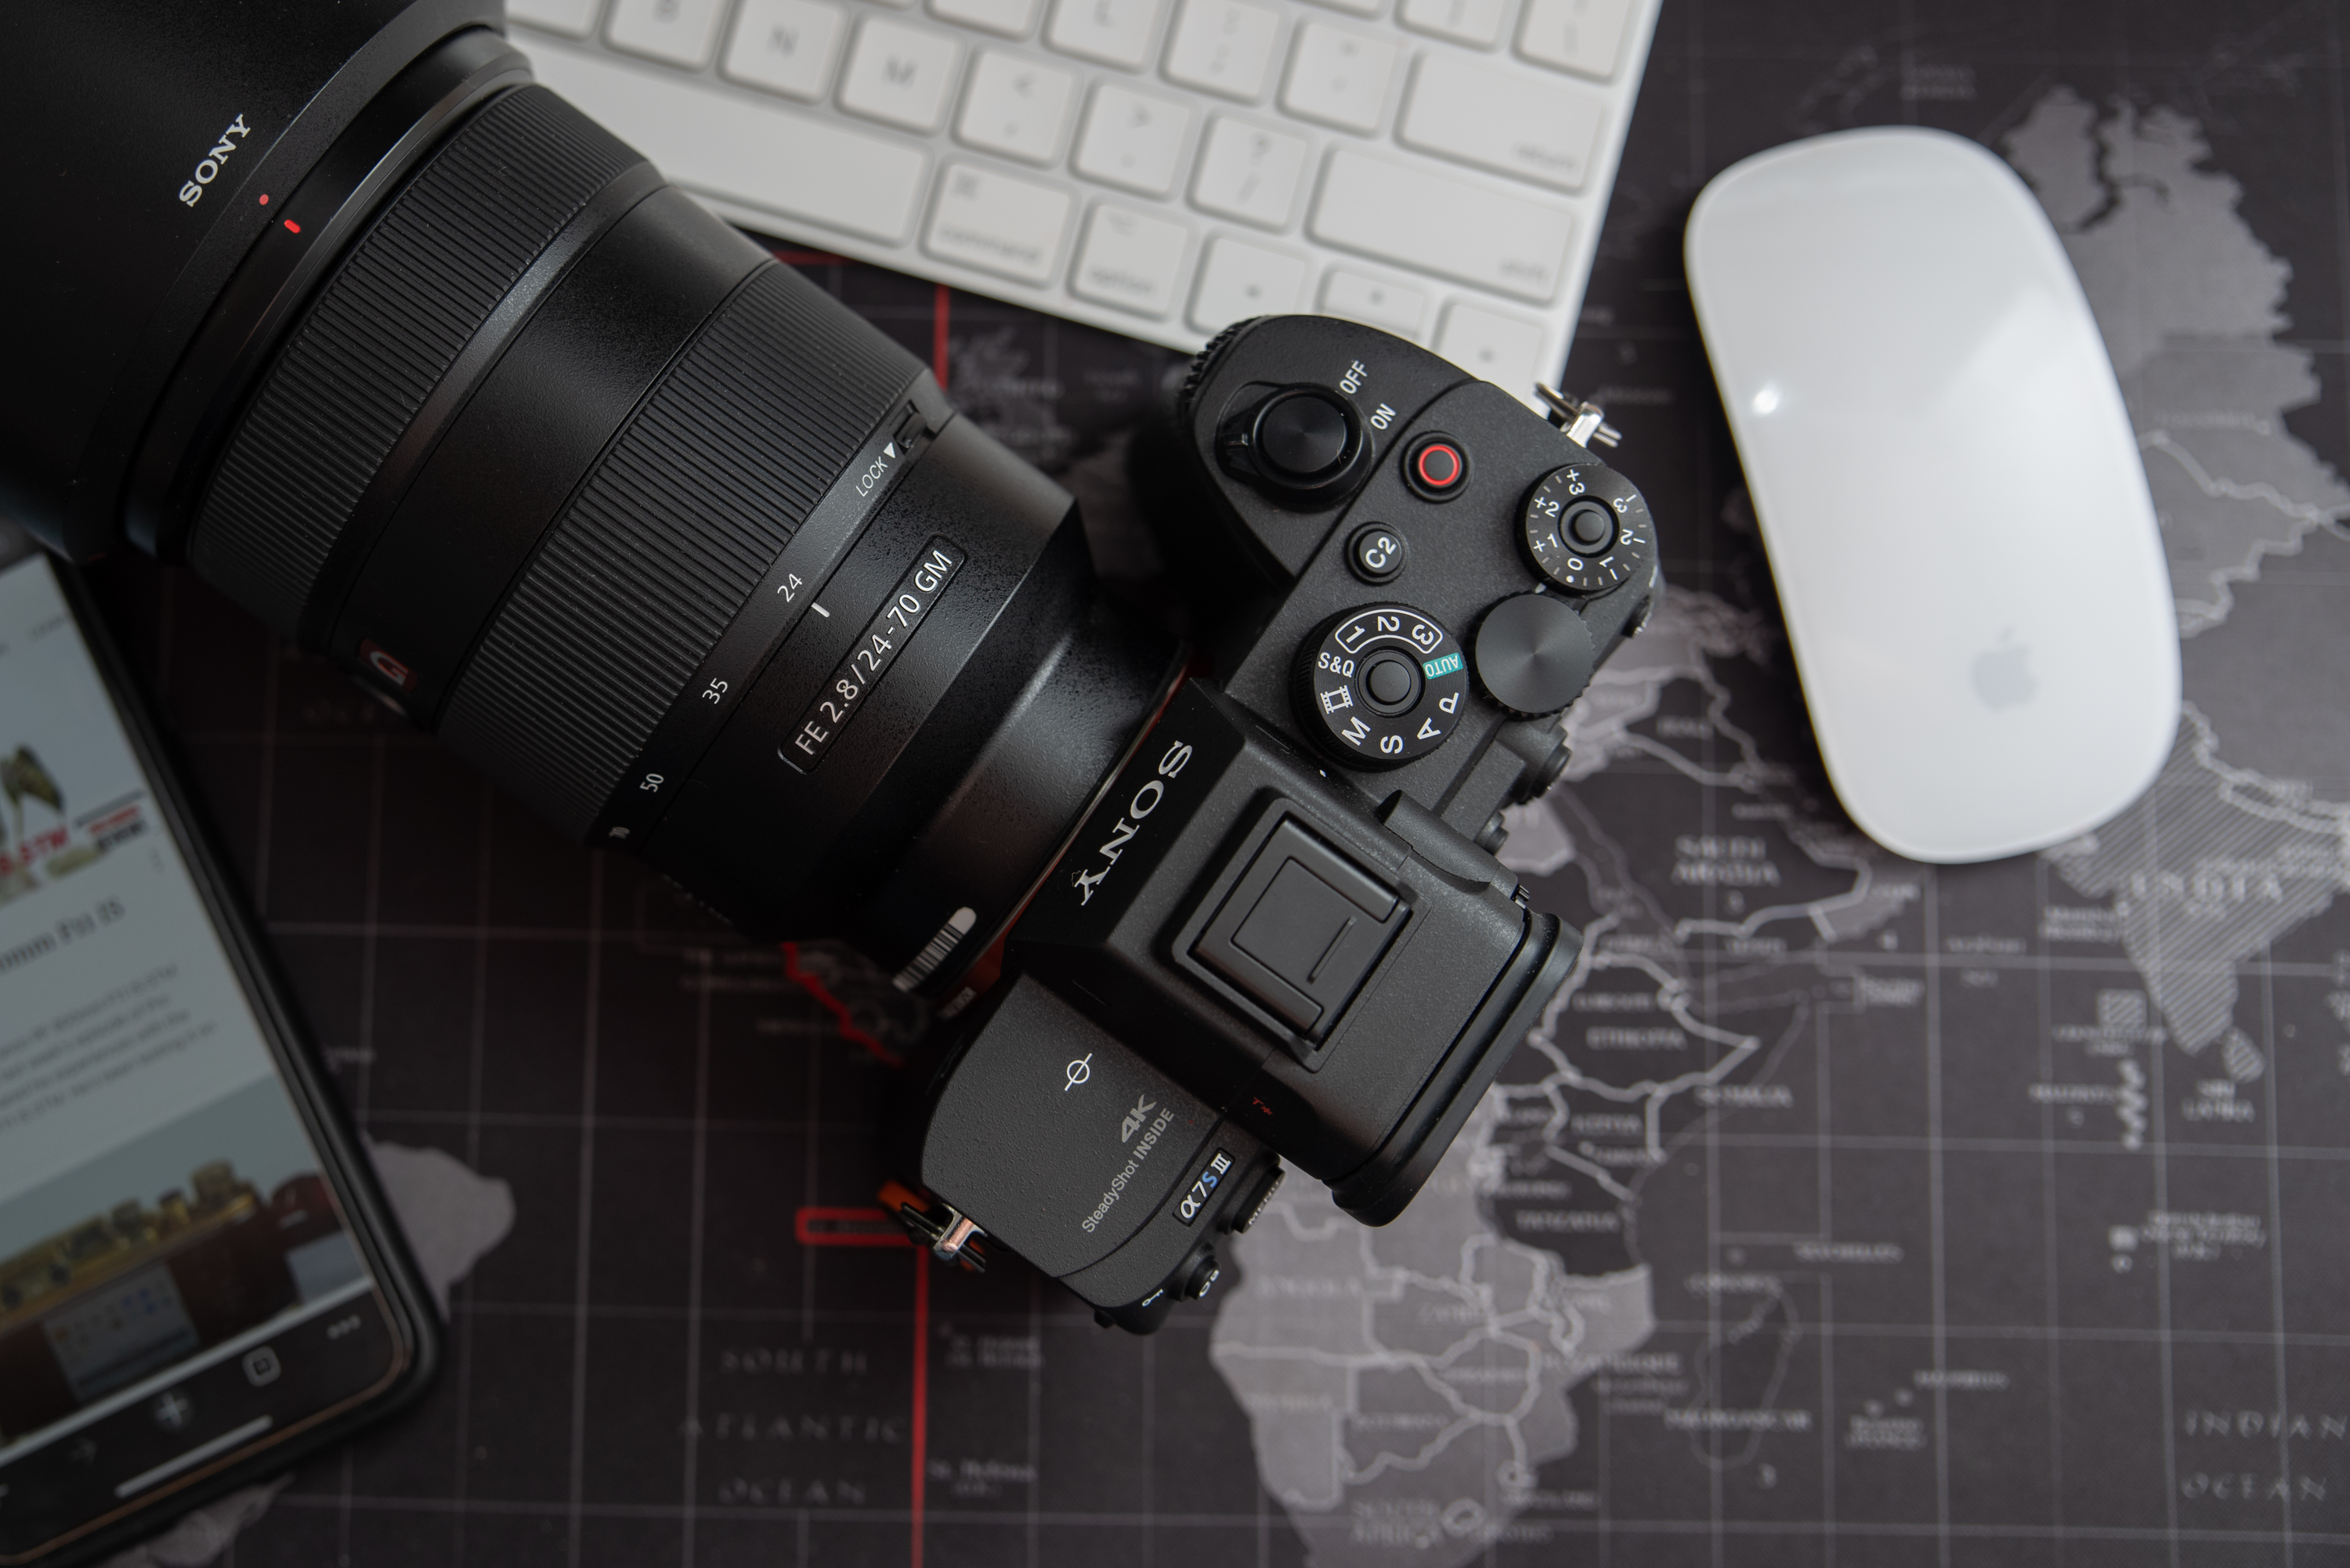 New Sony a7s III Firmware Is a Freebie Targeting Better Focus